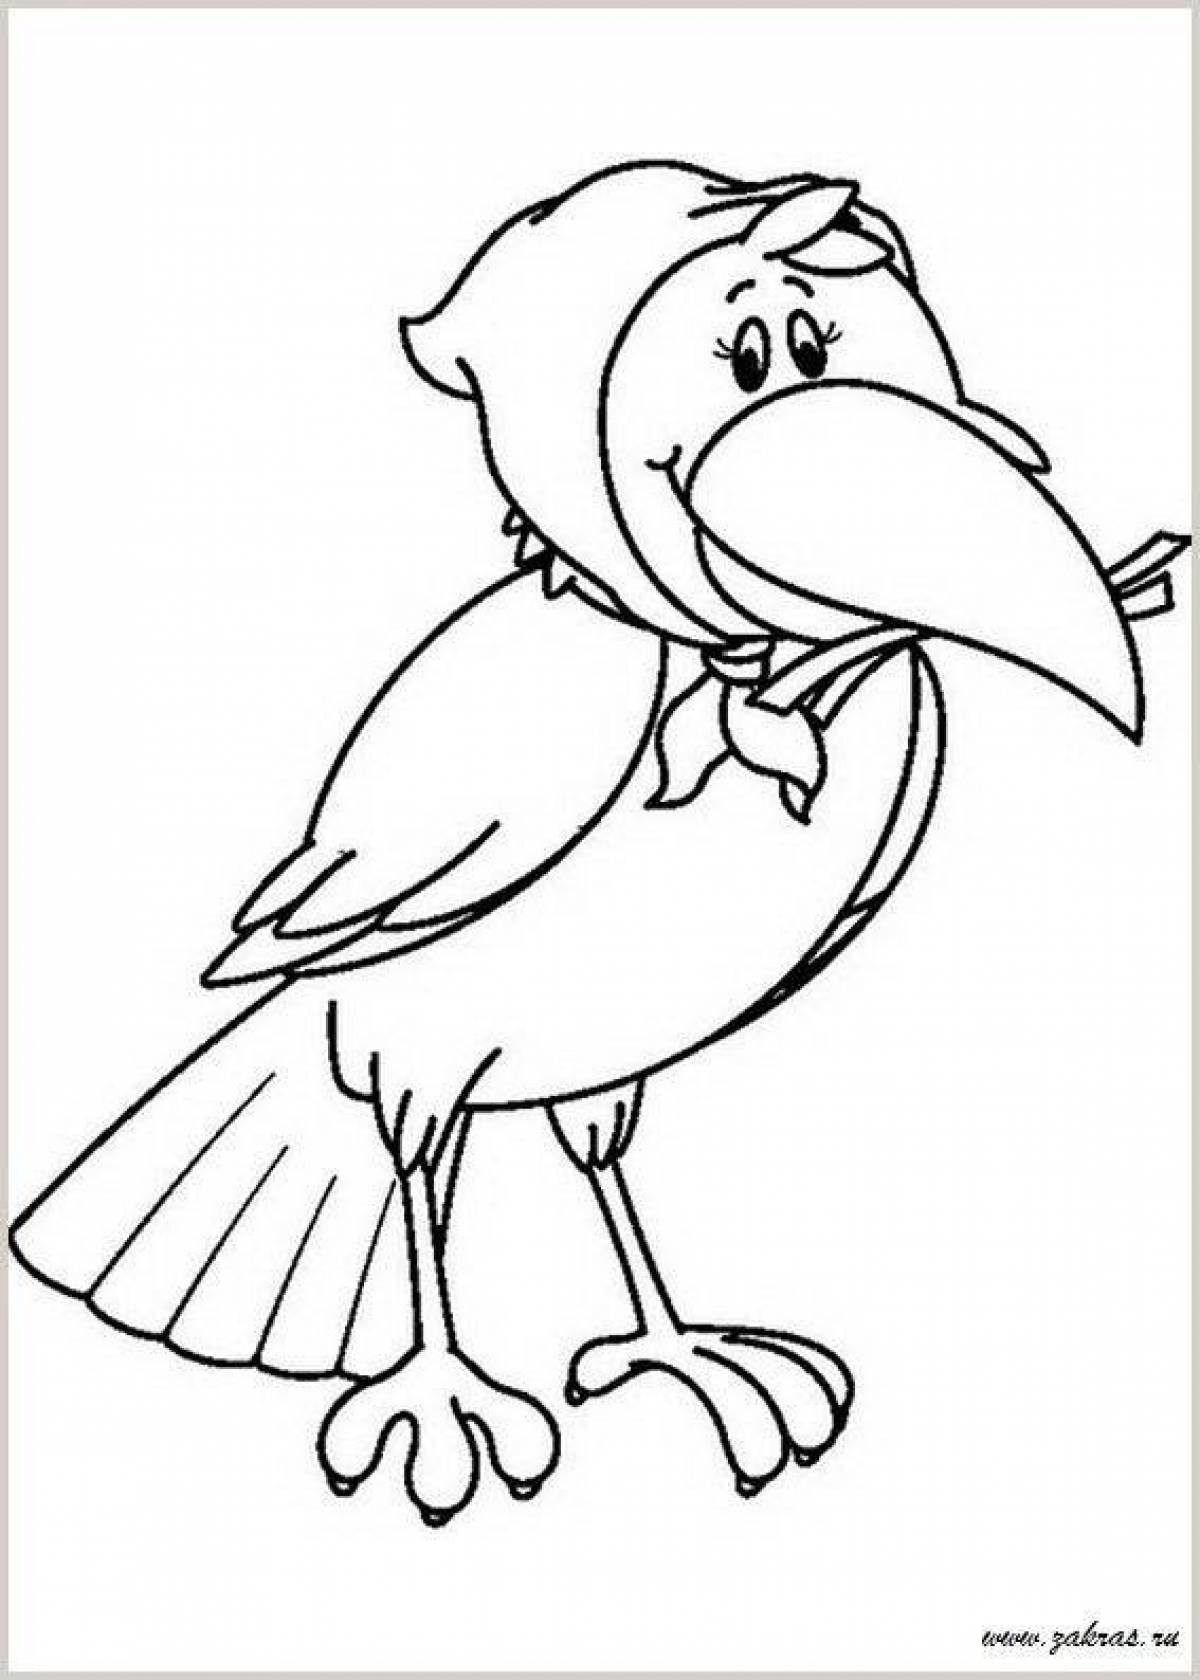 Stimulating crow coloring page for kids